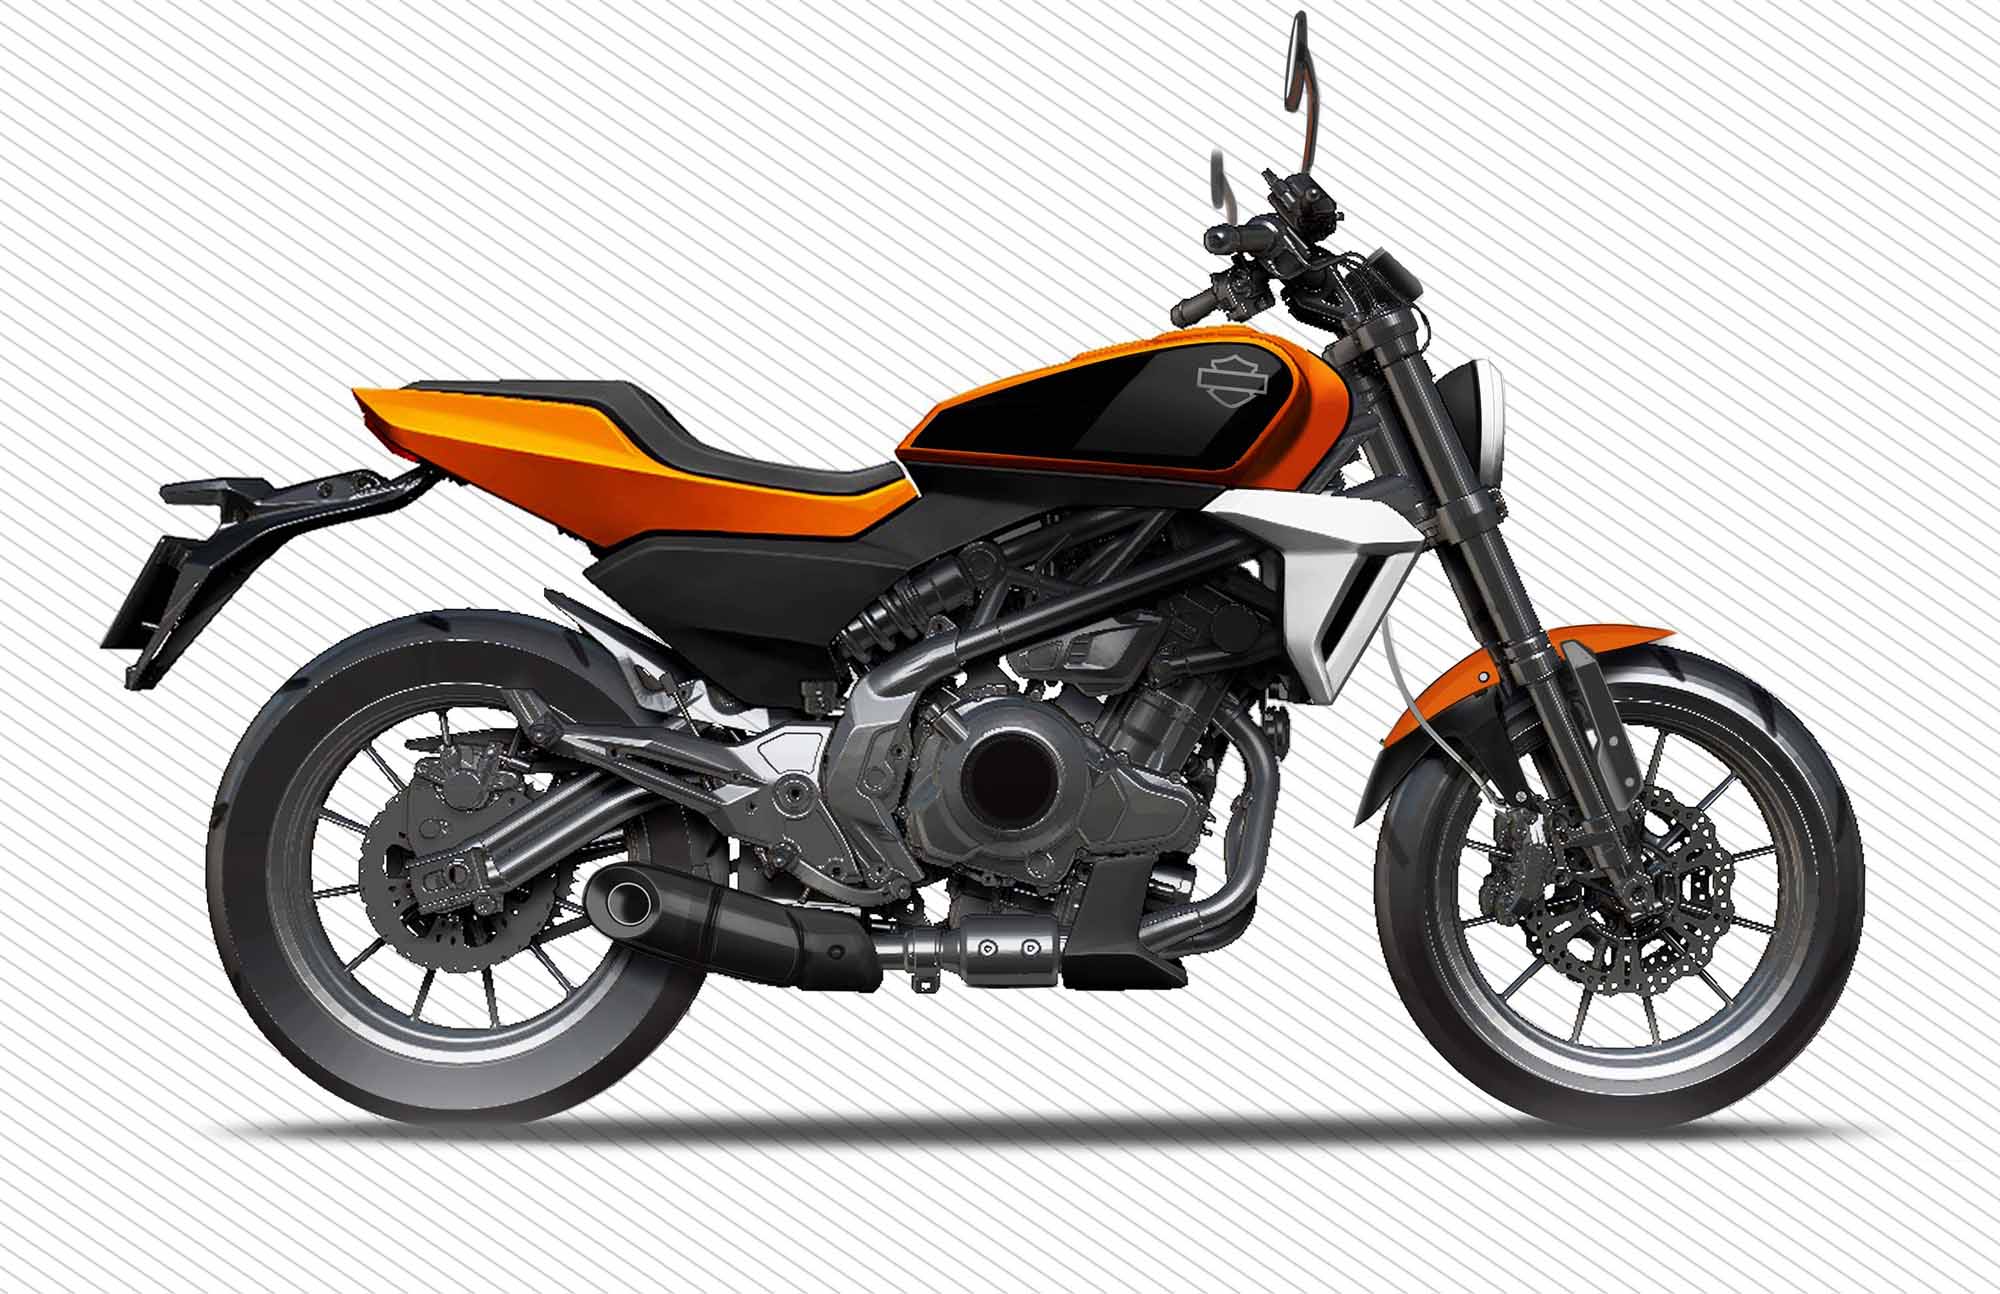 Harley-Davidson with new possible partner?
- also in the App MOTORCYCLE NEWS